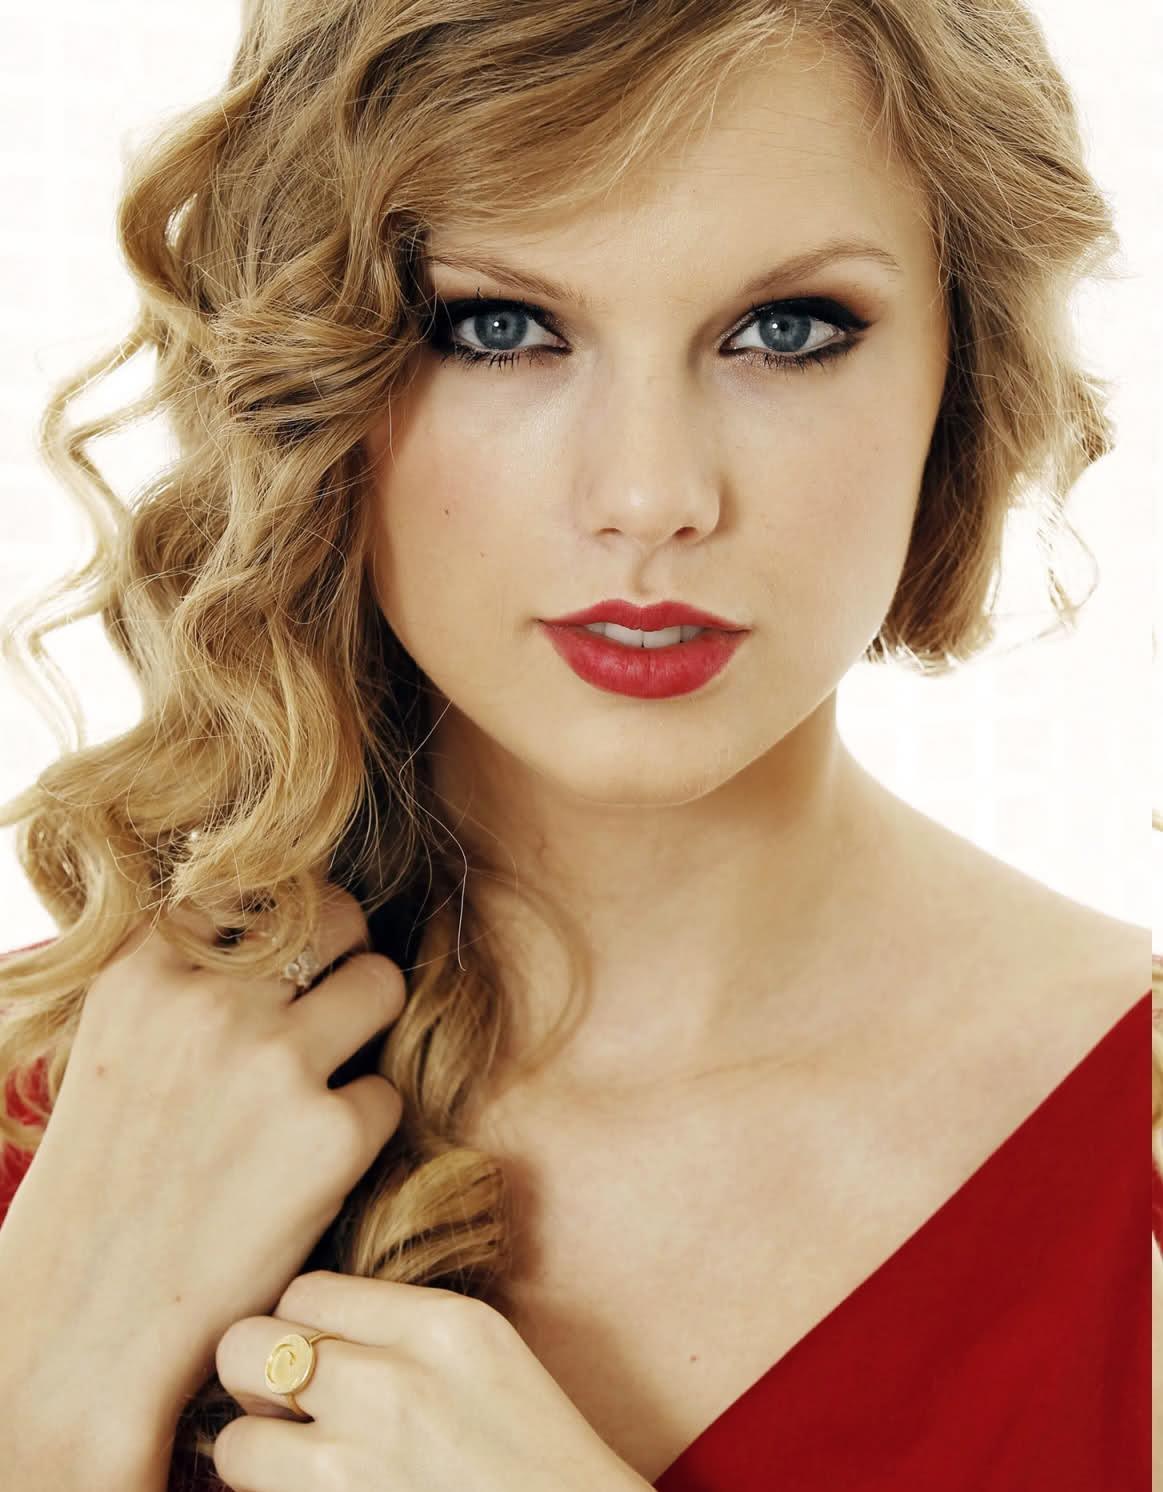 taylor swift real name